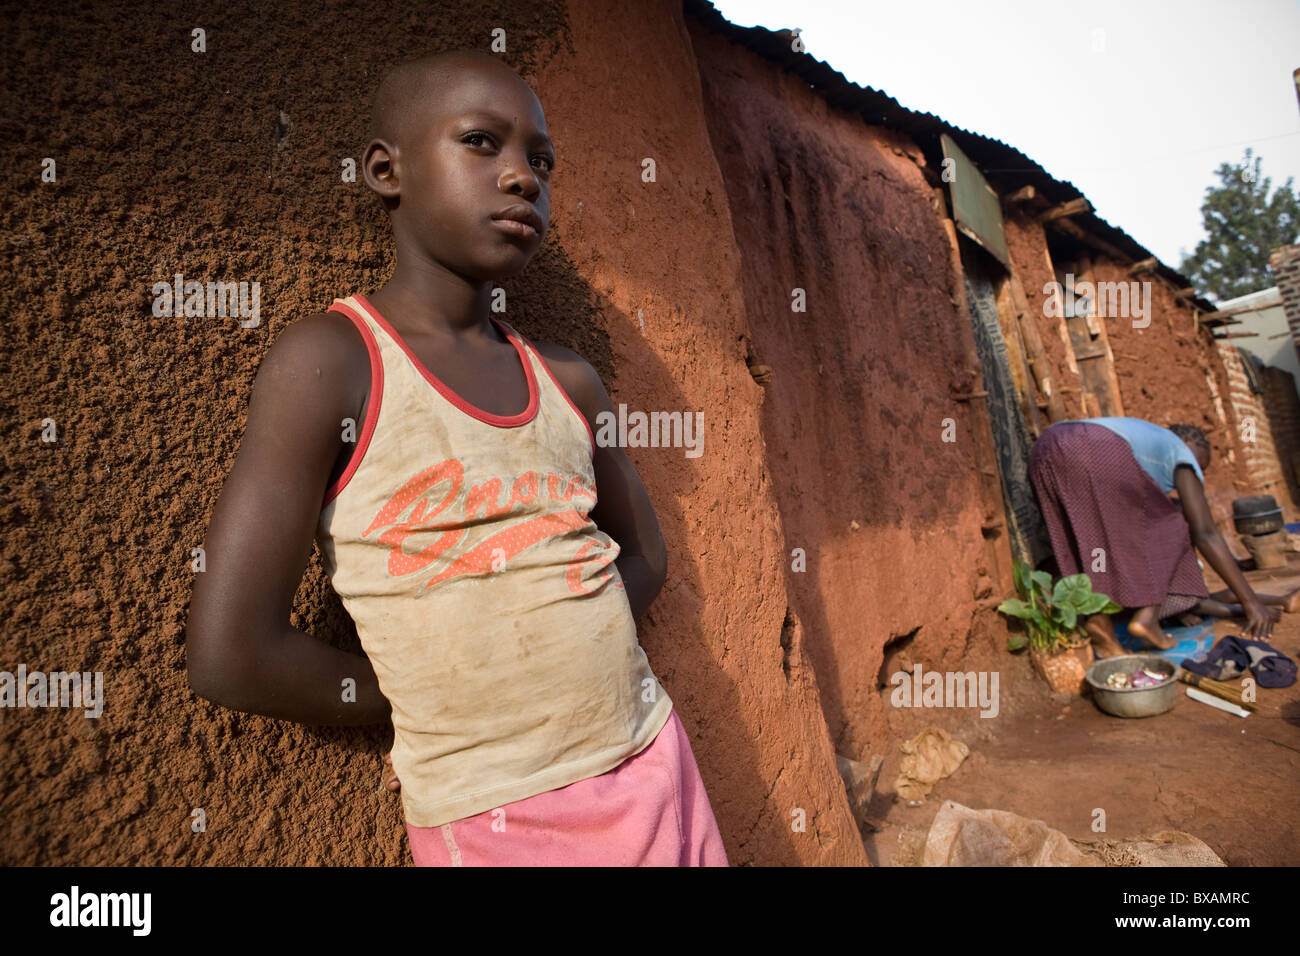 A boy stands alone outside a mud house in Jinja, Uganda, East Africa. Stock Photo